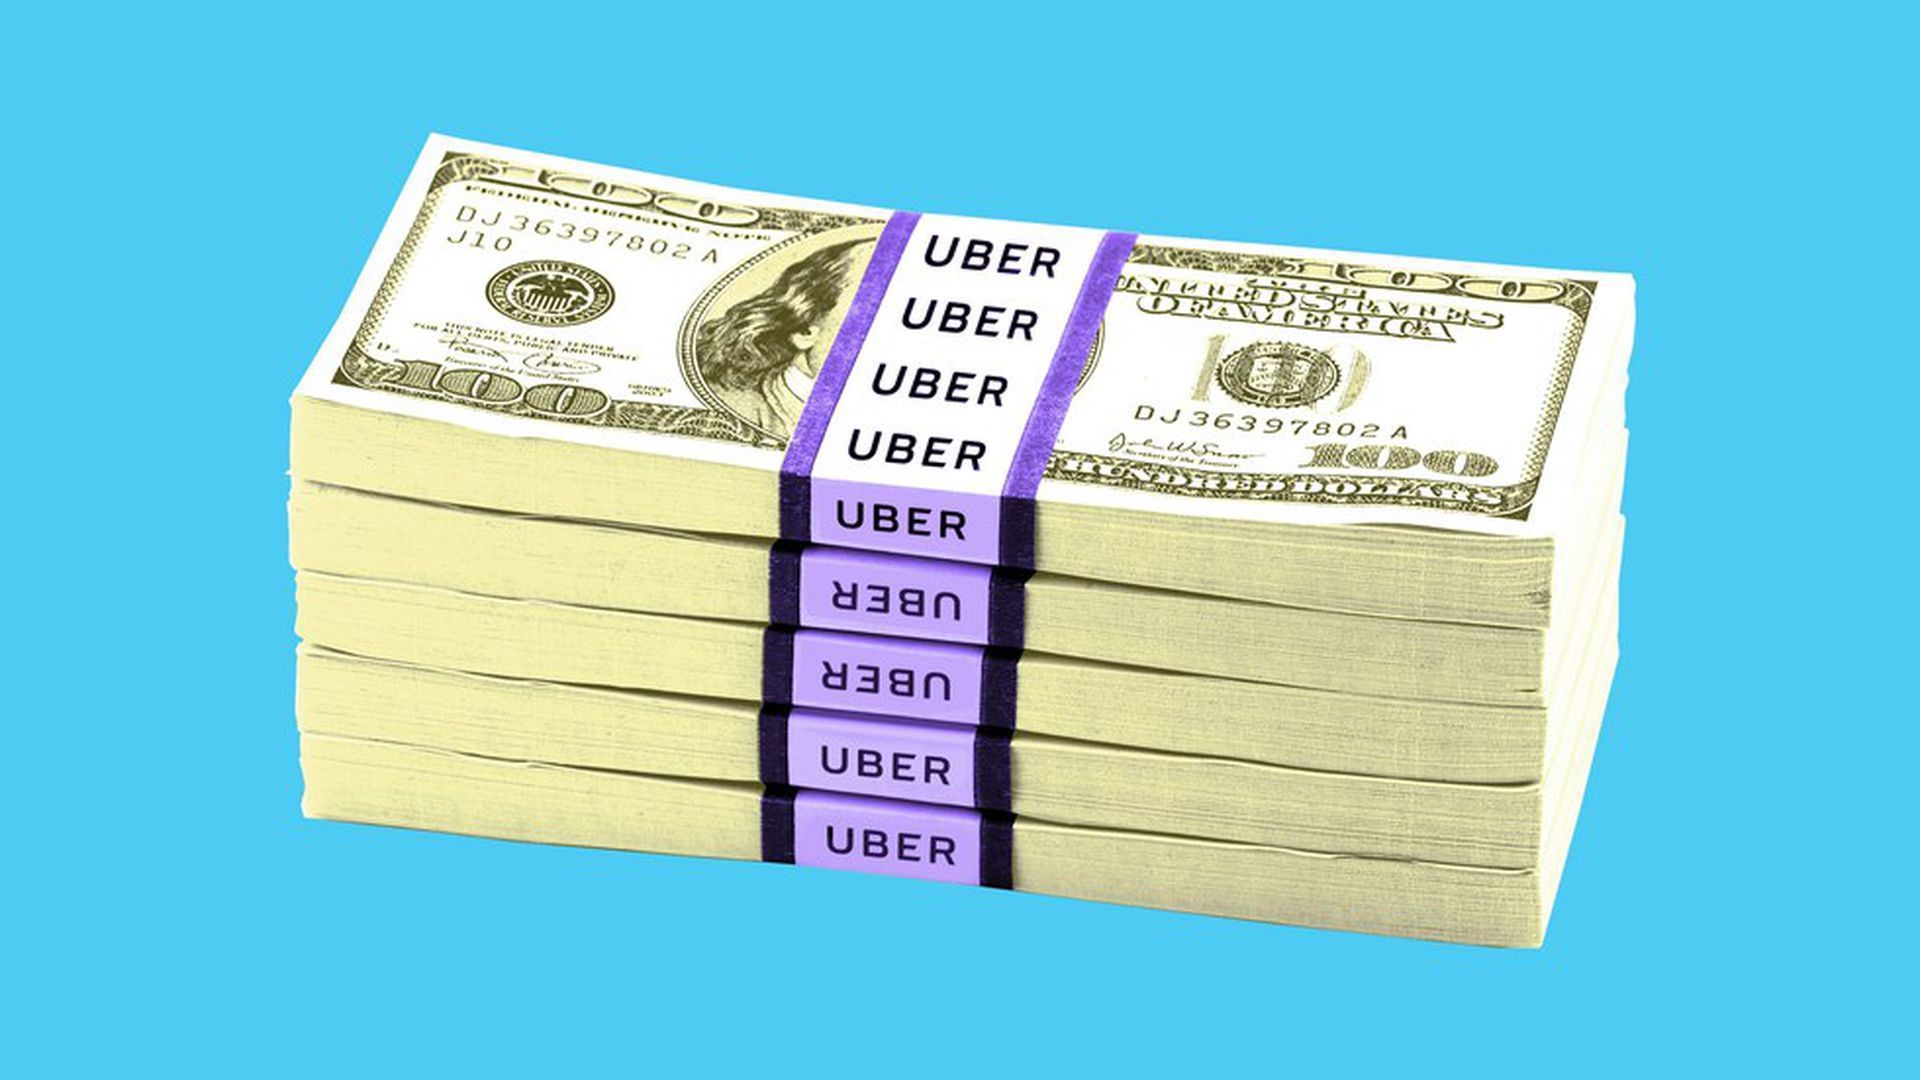 Image of a stock of bills with an Uber label.